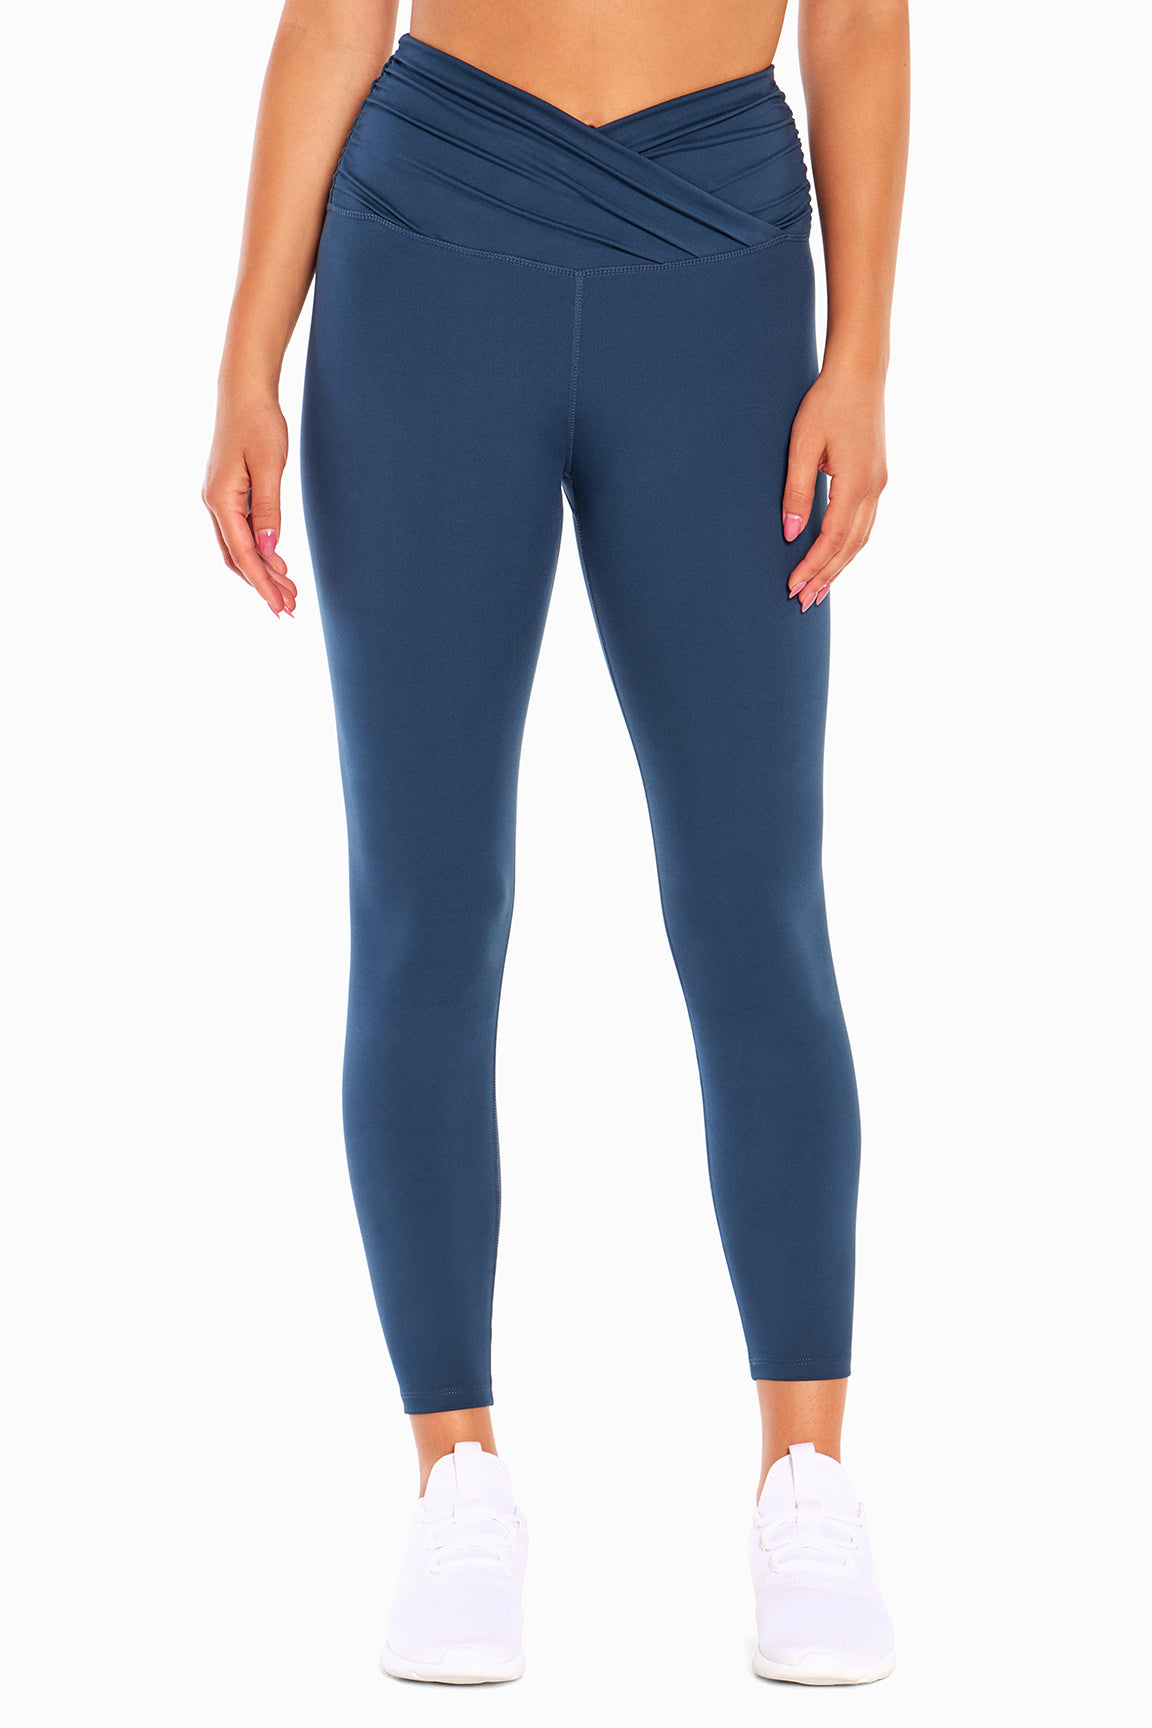 Hue Navy Leggings with Wide Waist Band